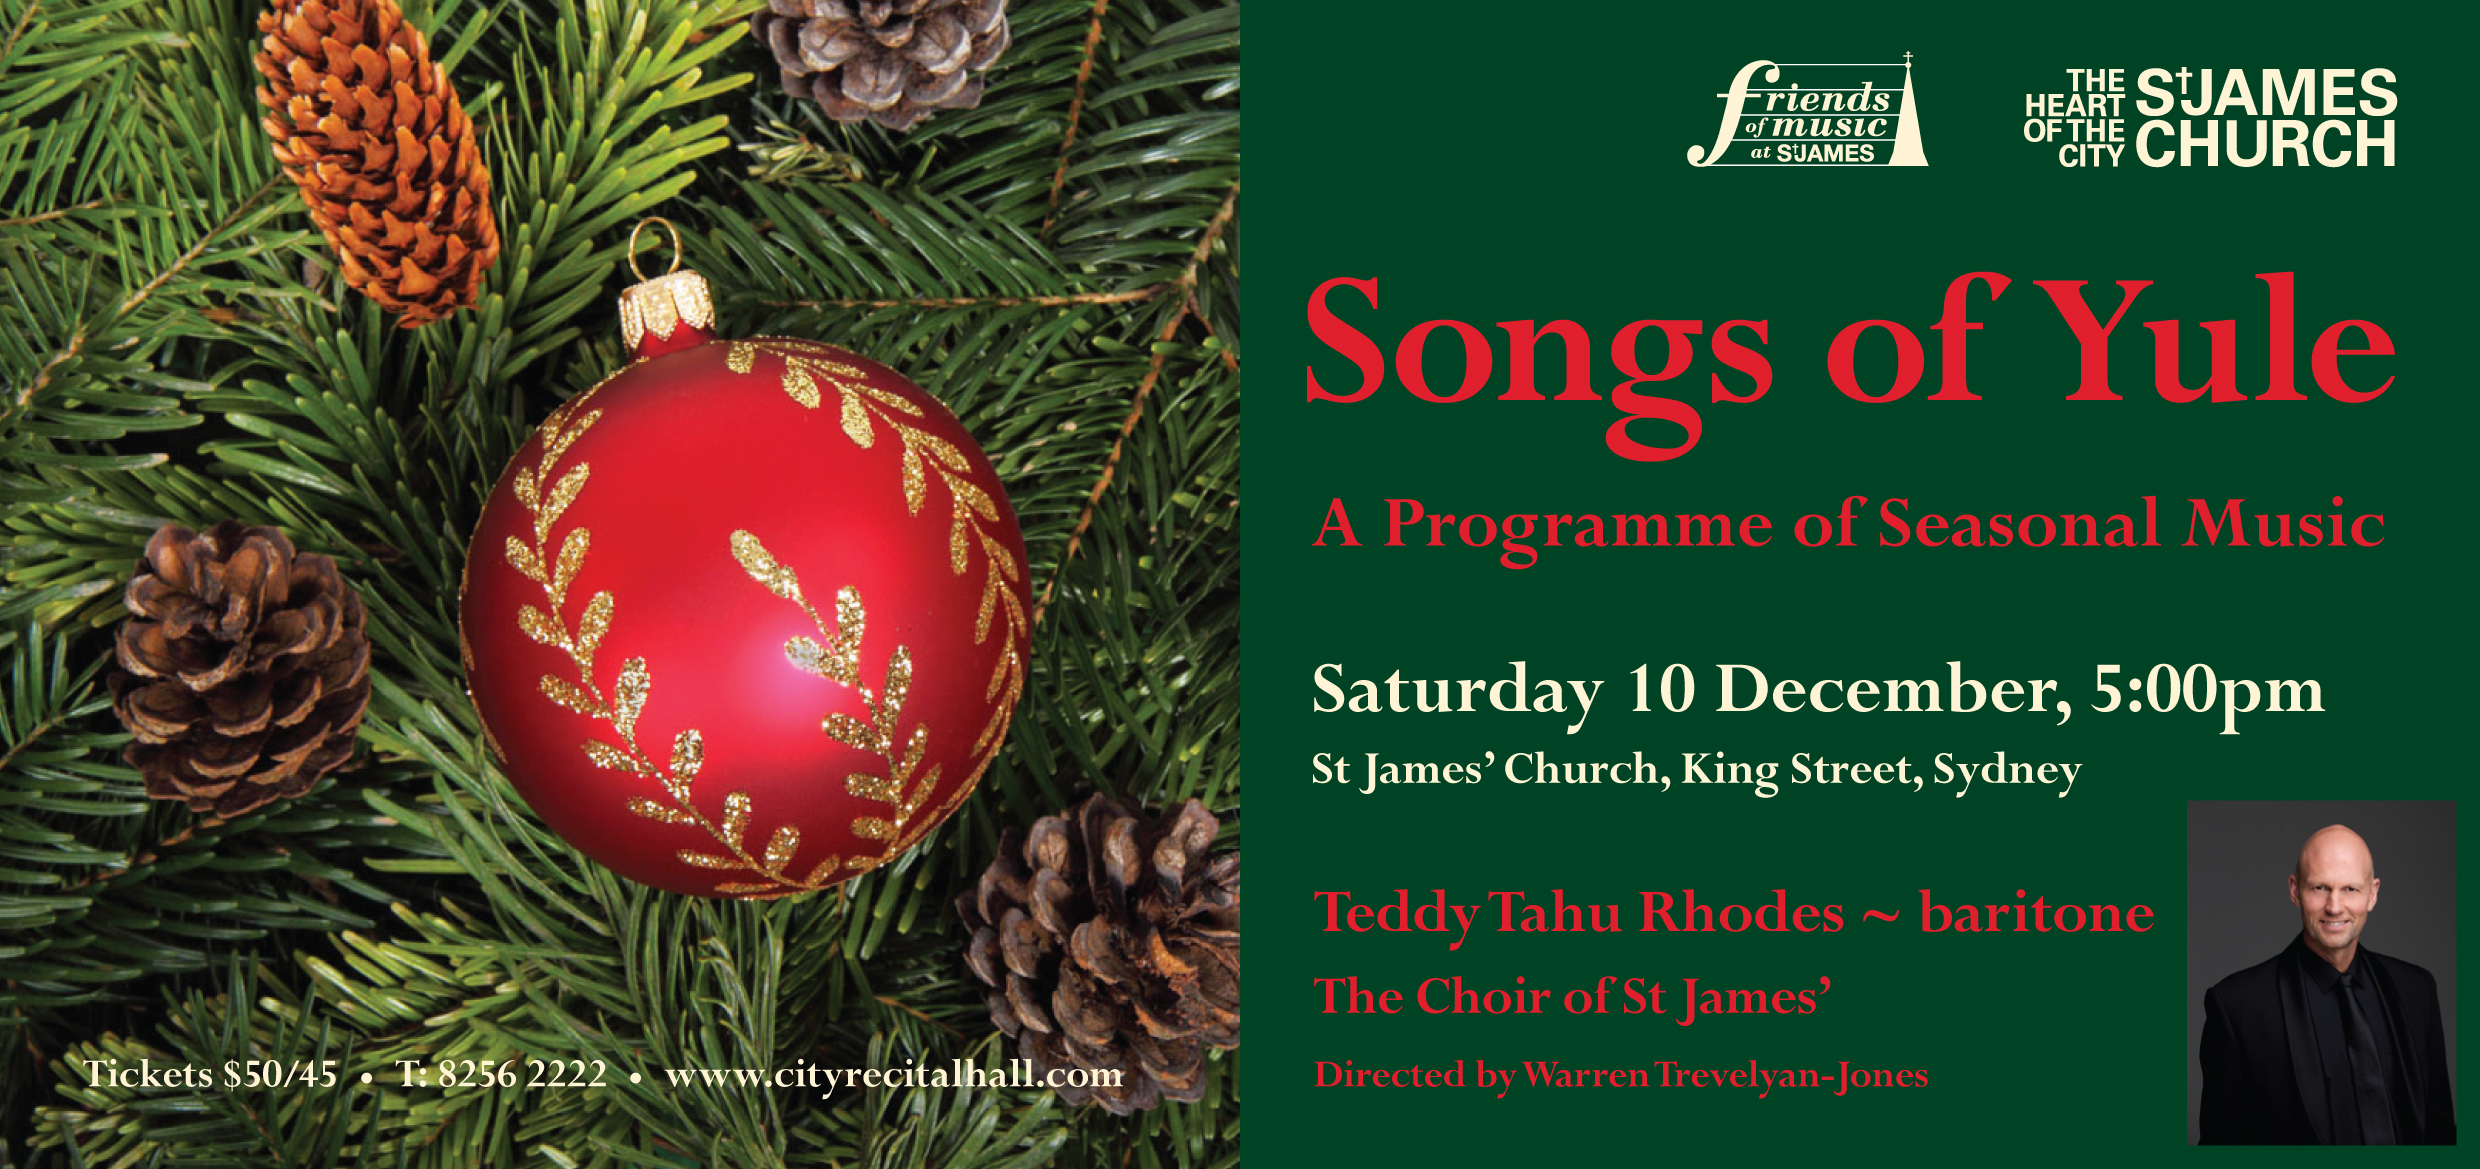 Songs Of Yule With The Choir Of St James’ And Teddy Tahu Rhodes